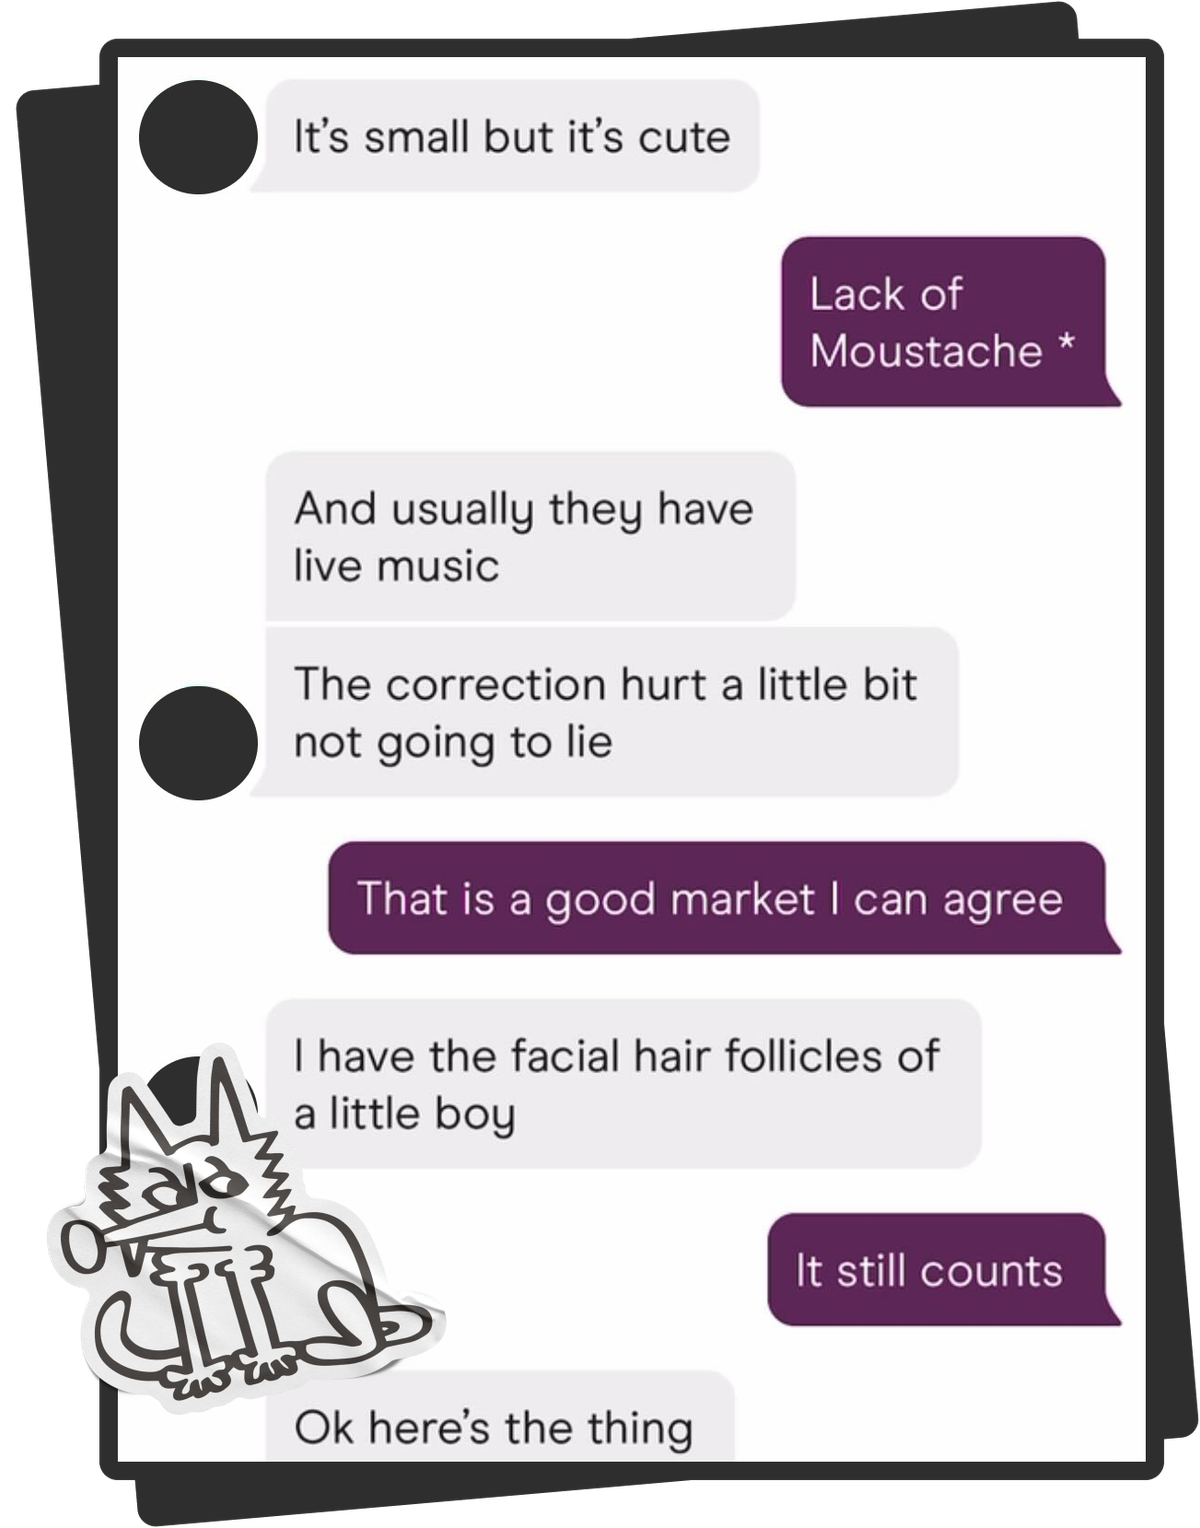 alt="Screenshot of chat history on Hinge talking about lack of a mustache and a good market. Sticker of cartoon cat on bottom left."